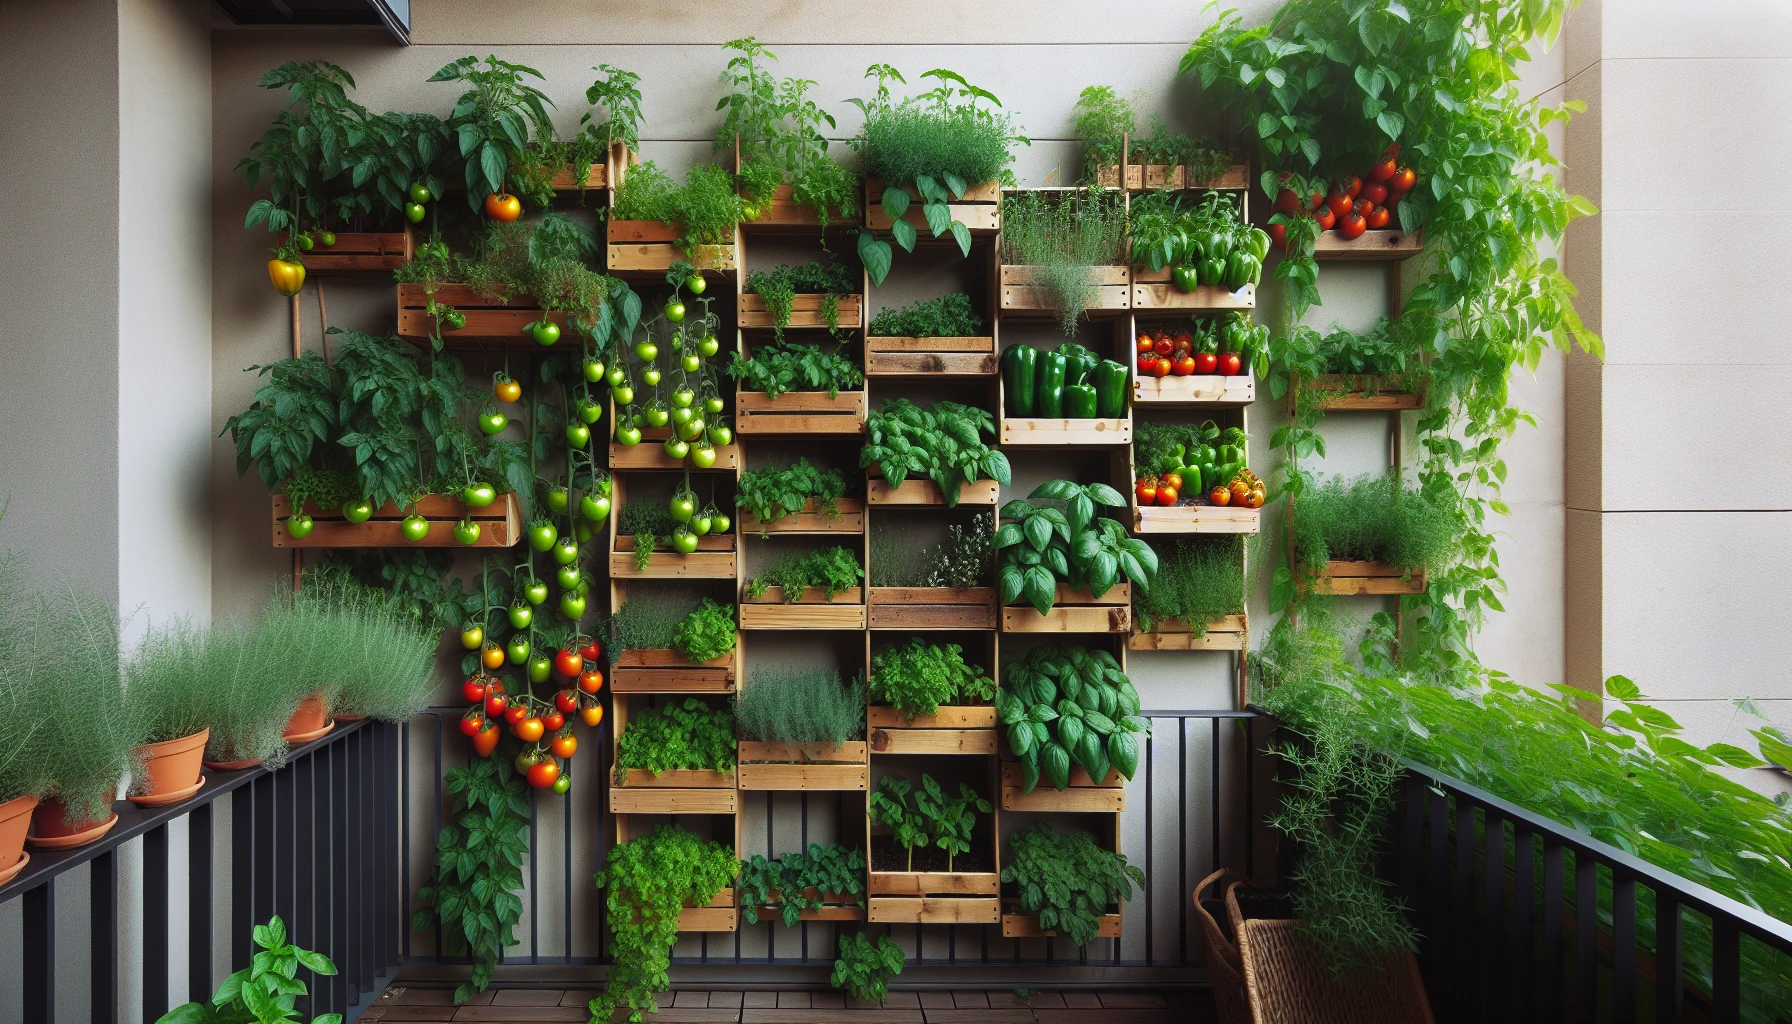 Vertical gardening setup with various vegetables and herbs